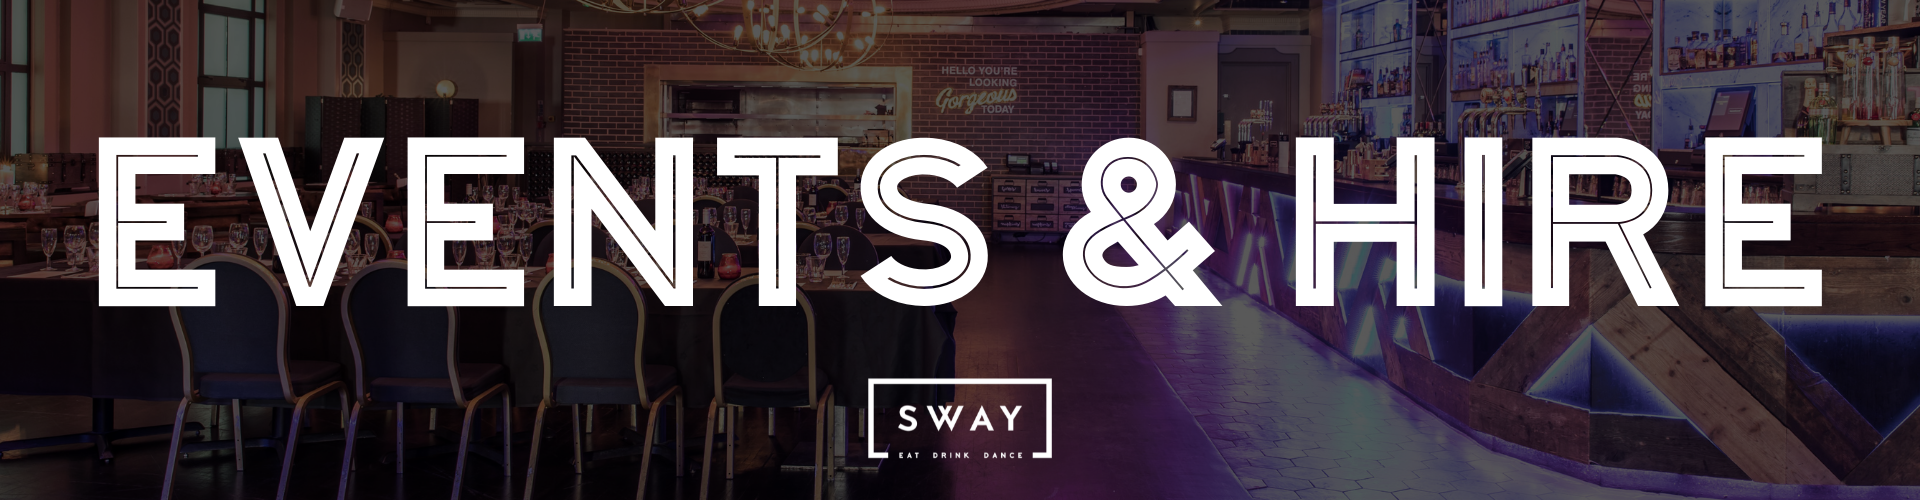 Events & Hire at Sway